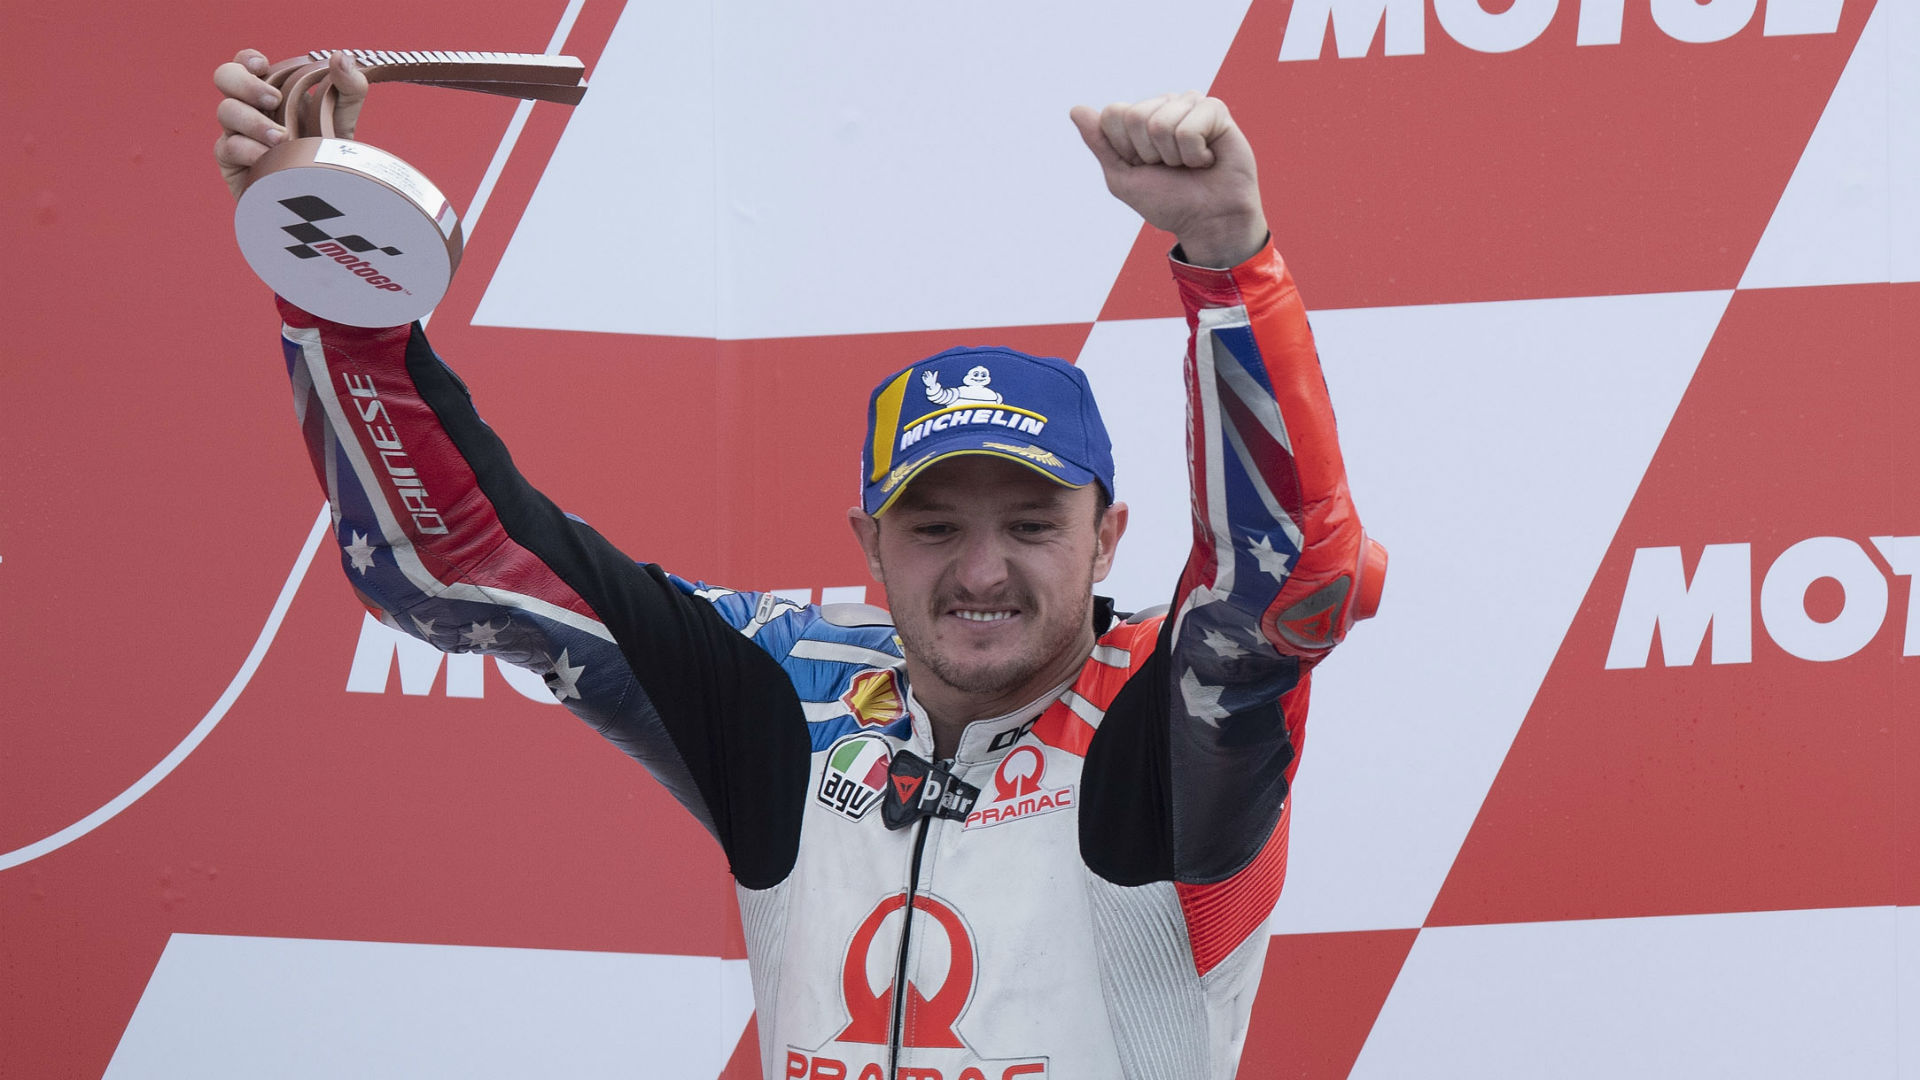 The 2021 MotoGP season will see Jack Miller become the third Australian to race for the Ducati factory team.